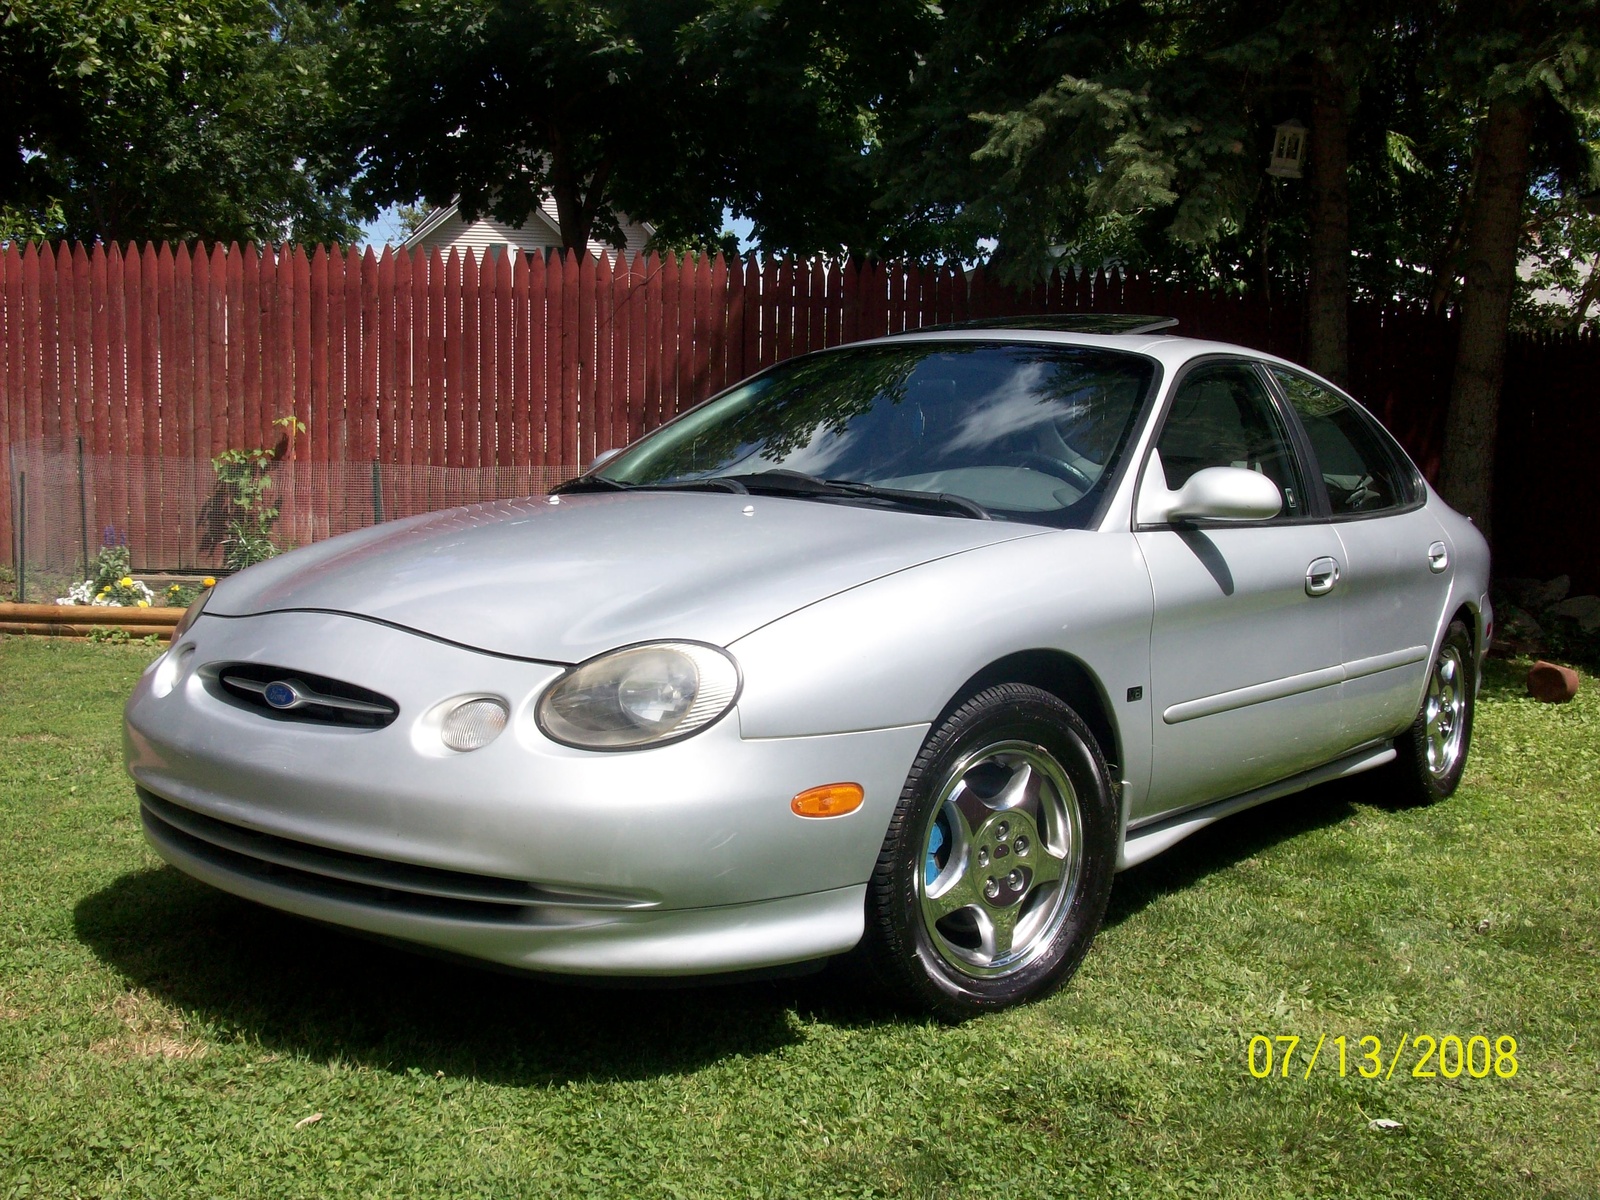 1997 Ford taurus sho review #7